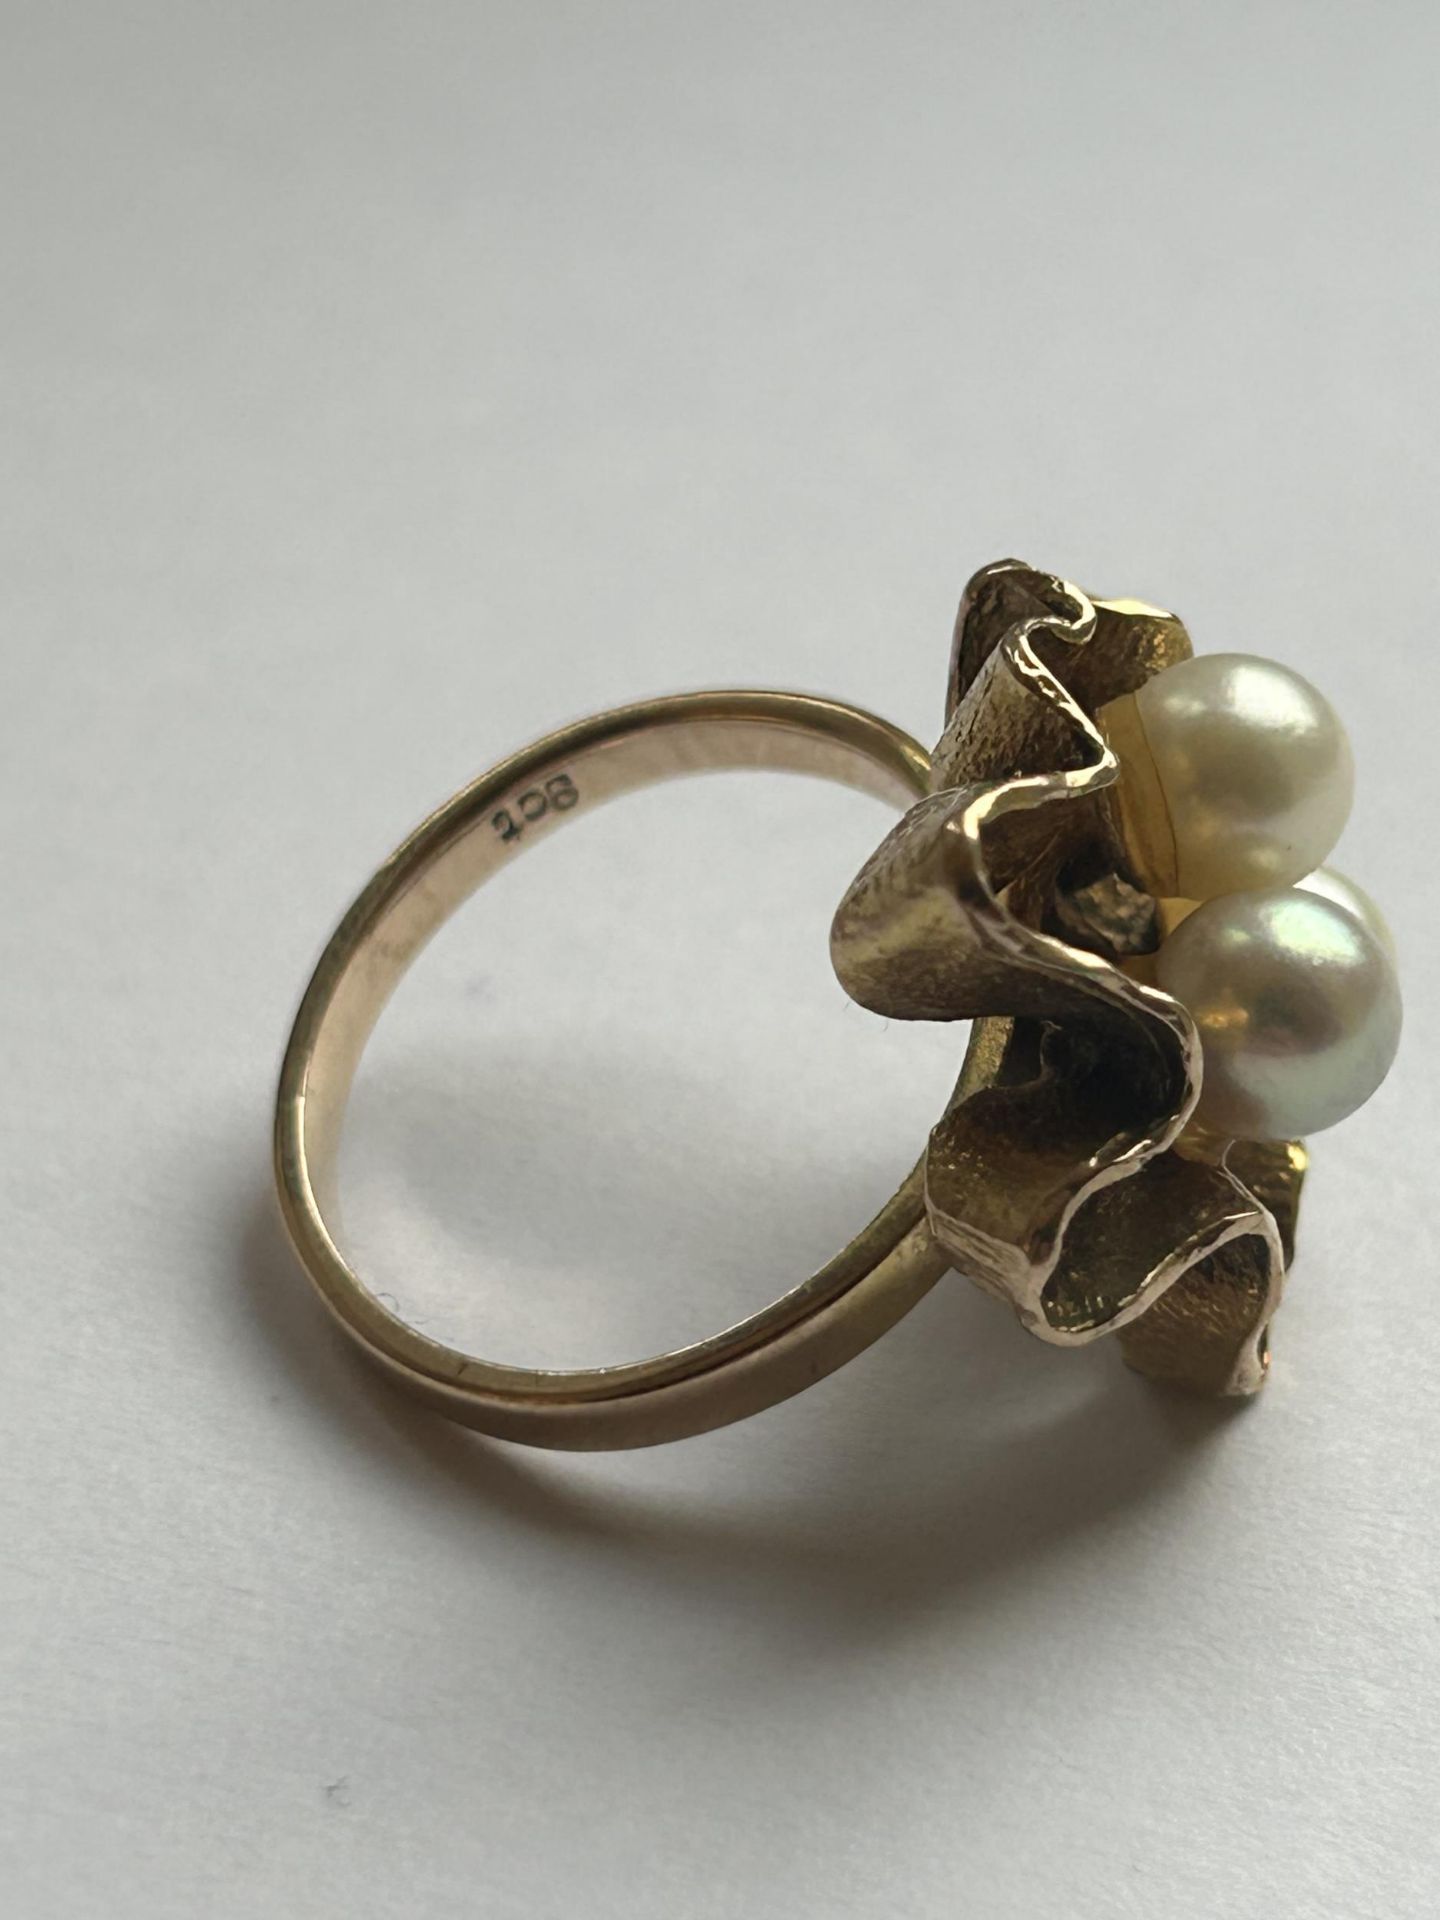 A 9CT YELLOW GOLD AND PEARL RING SIZE K, WEIGHT 4.44 GRAMS - Image 4 of 4